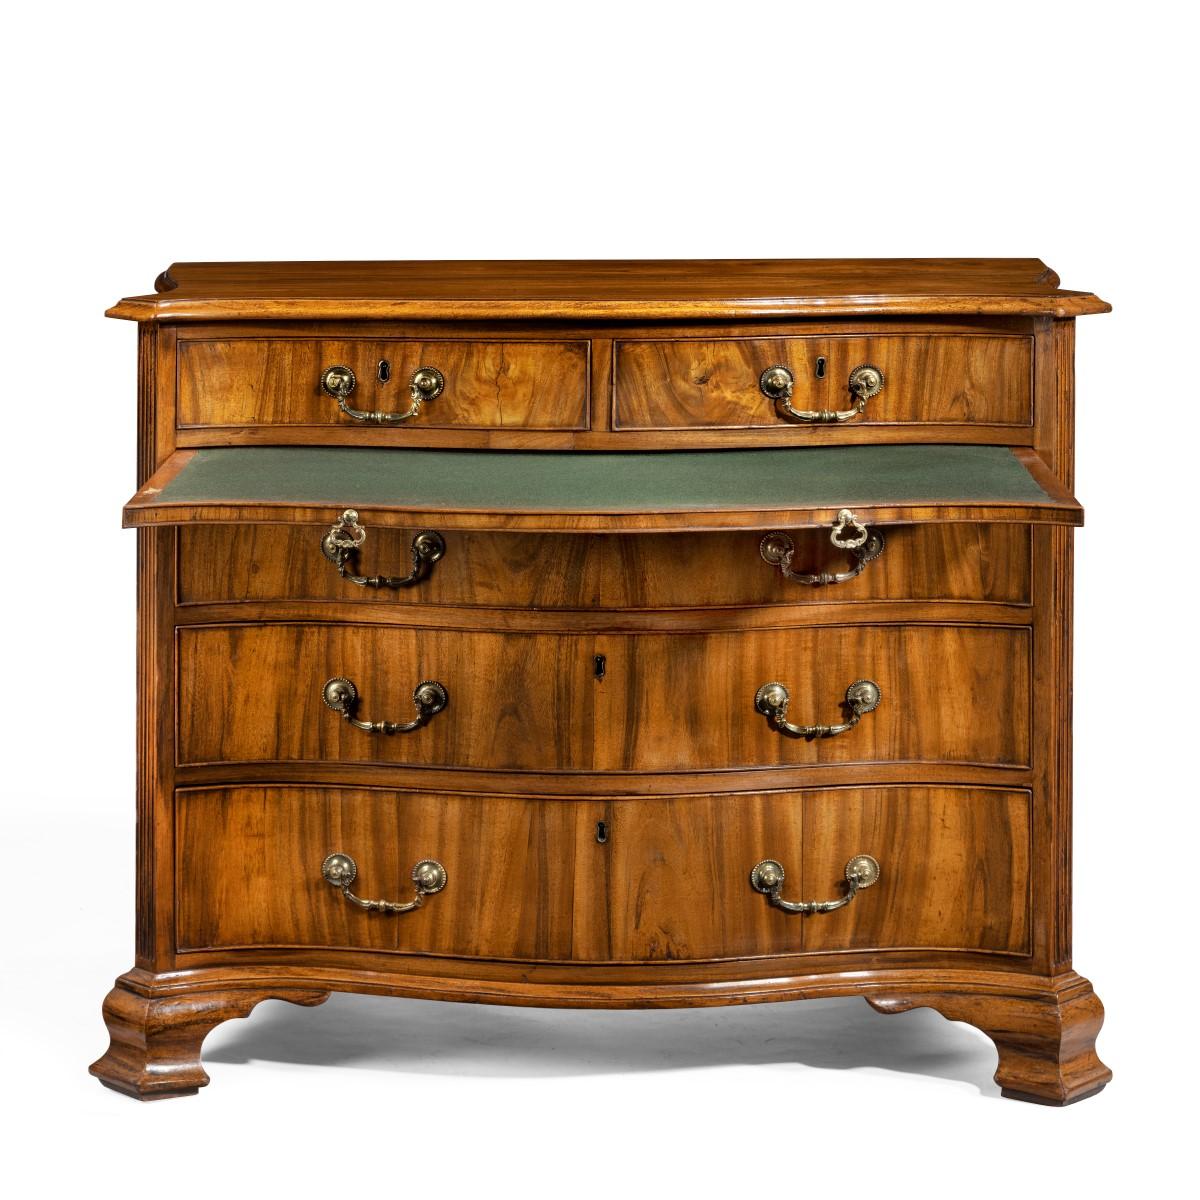 A striking George III serpentine chest of drawers, constructed in oak veneered in coromandel with two short drawers above a brushing slide and three long drawers, the canted corners with stop fluting, original gilt brass castors and handles, all on